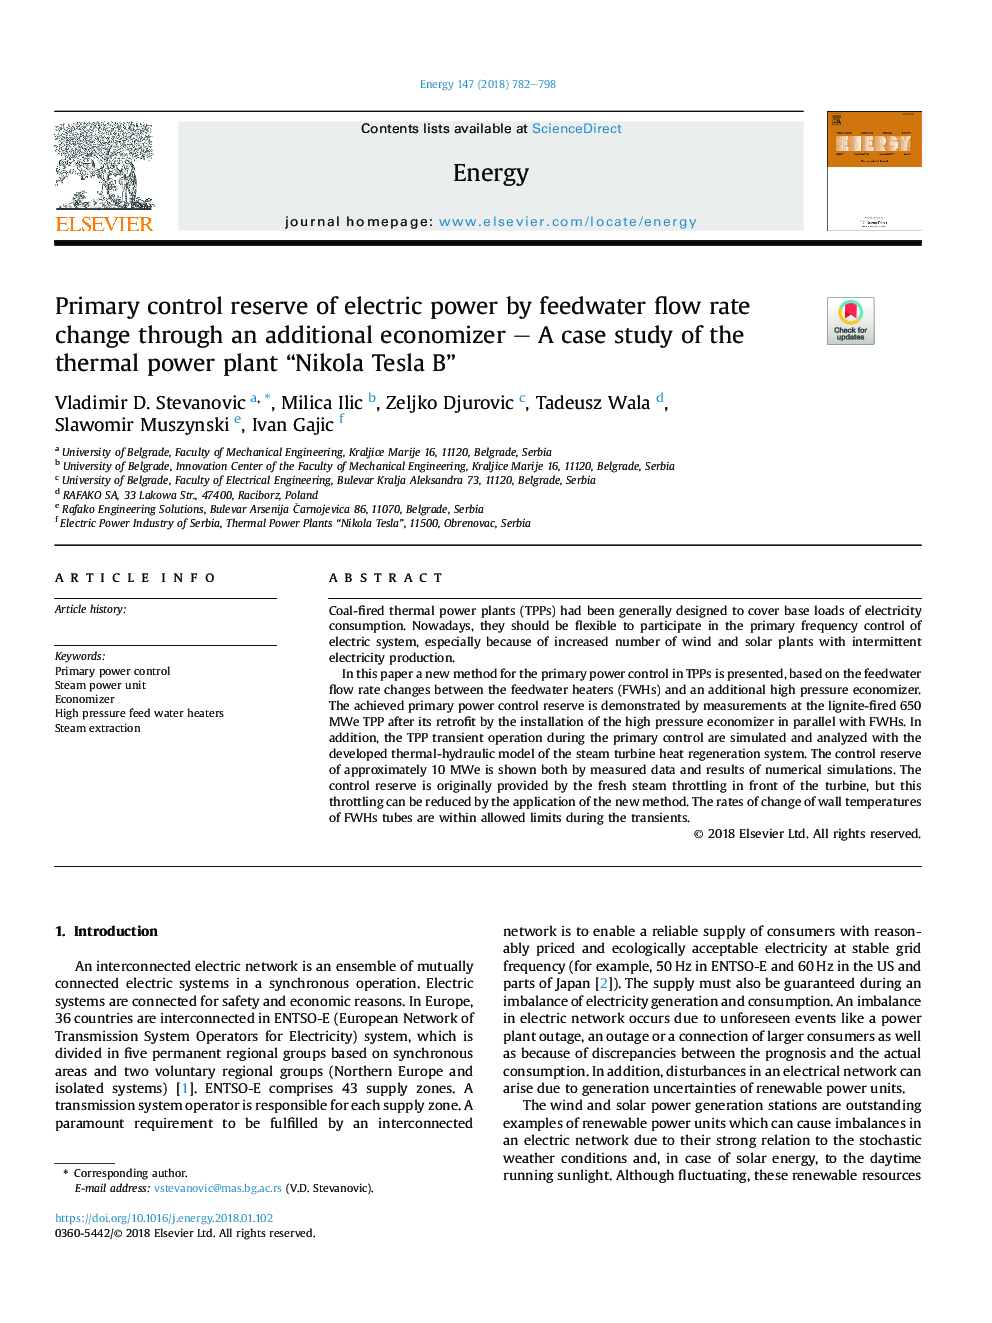 Primary control reserve of electric power by feedwater flow rate change through an additional economizer - A case study of the thermal power plant “Nikola Tesla B”